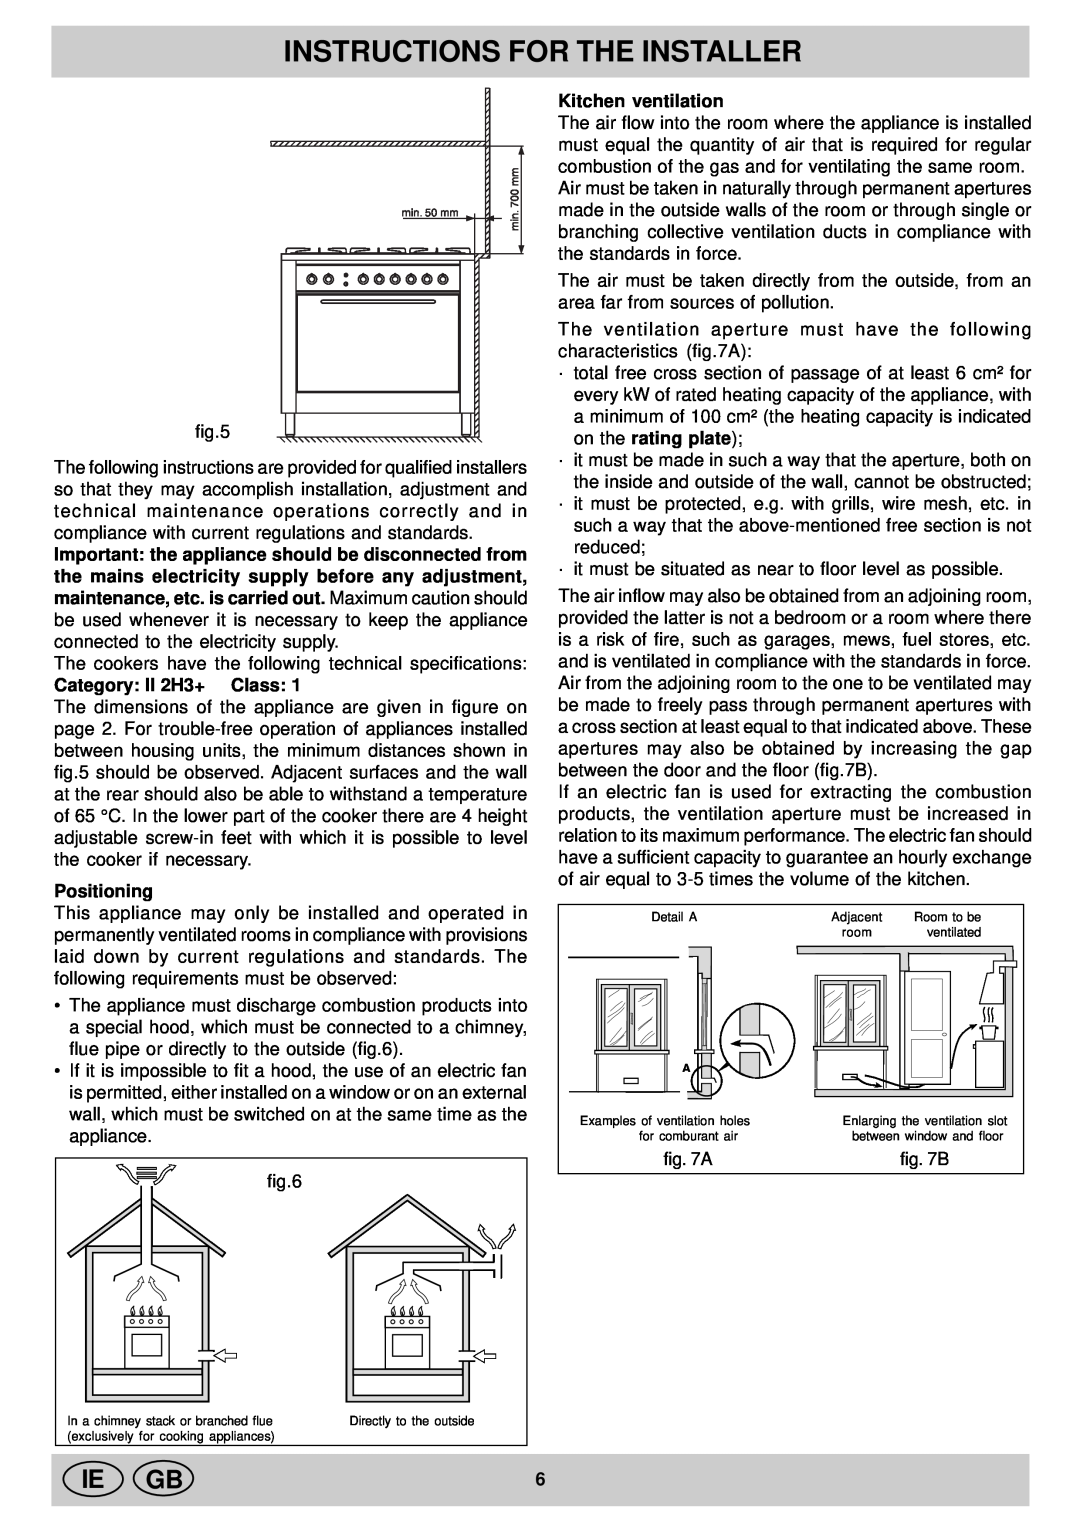 Indesit KP 958 MS.B manual Instructions For The Installer, Ie Gb, Category II 2H3+ Class, Positioning, Kitchen ventilation 